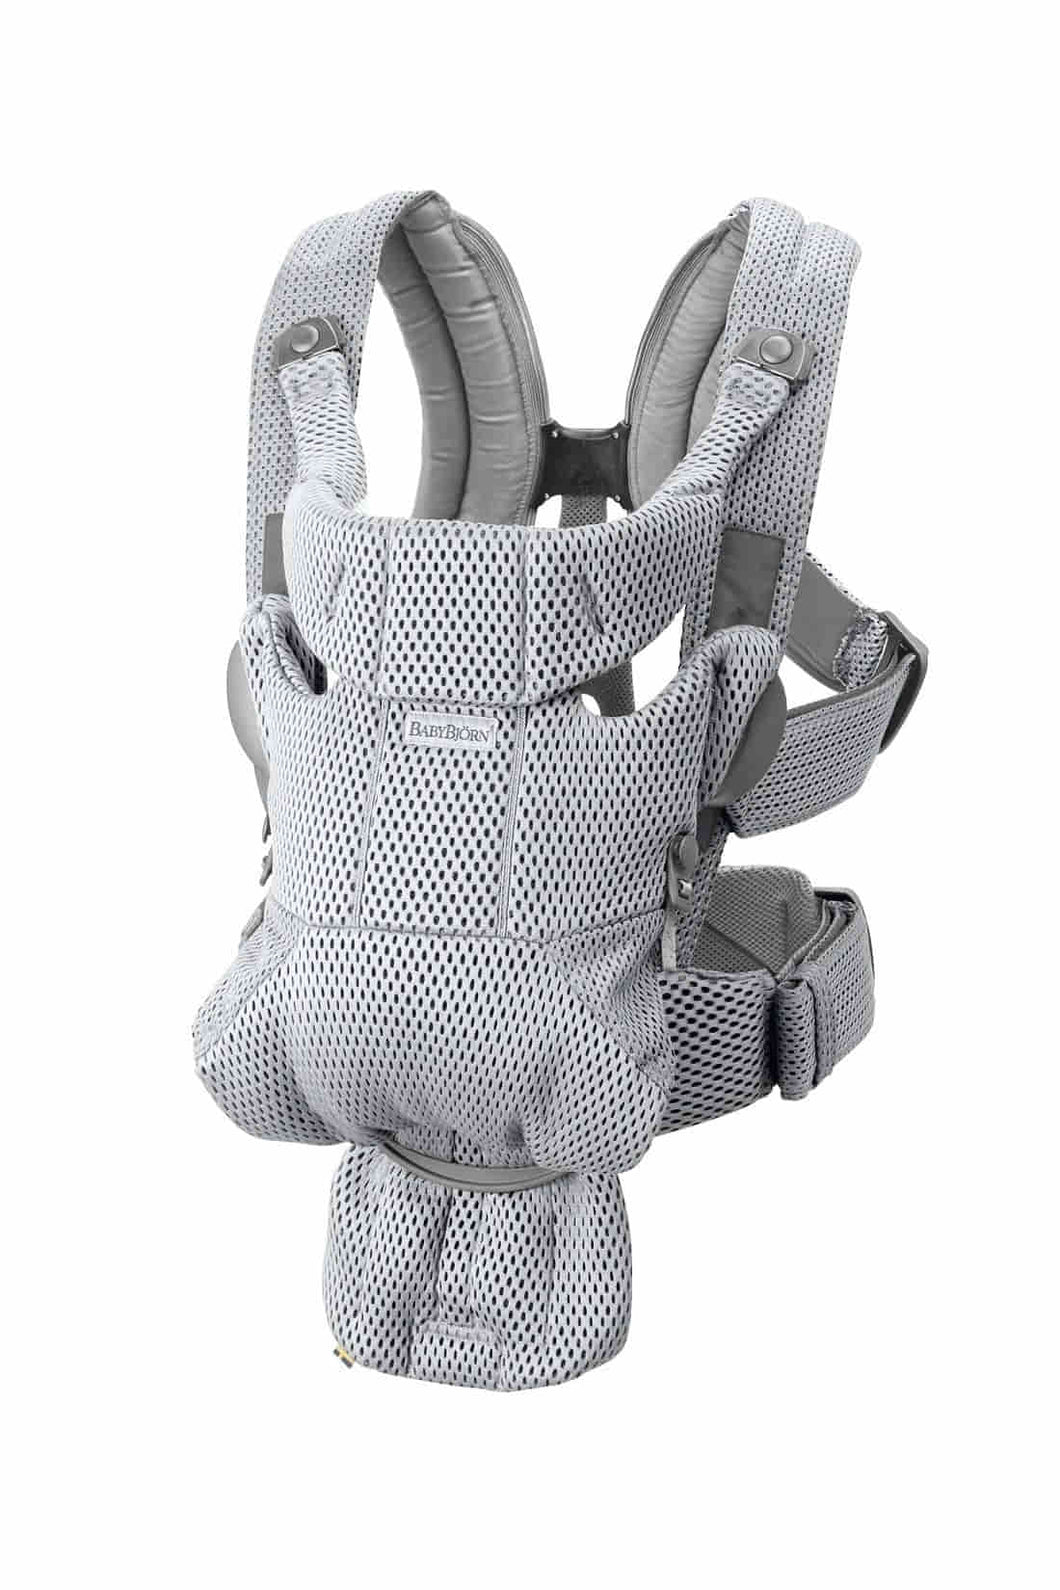 BabyBjorn Baby Carrier Move 2